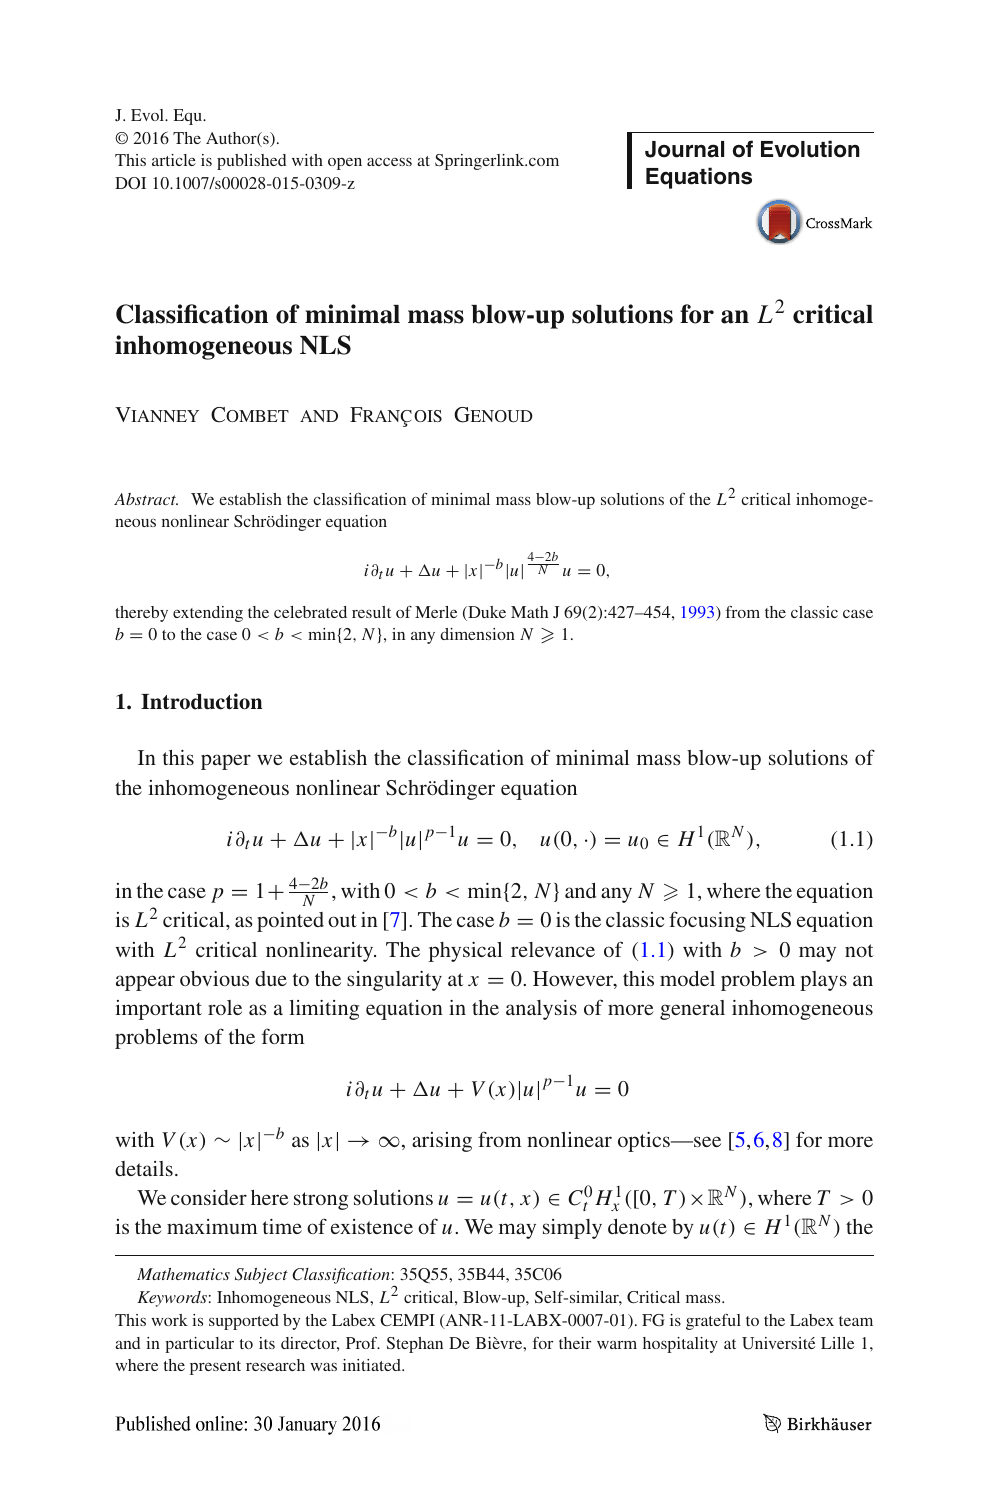 Classification Of Minimal Mass Blow Up Solutions For An L 2 L 2 Critical Inhomogeneous Nls Topic Of Research Paper In Mathematics Download Scholarly Article Pdf And Read For Free On Cyberleninka Open